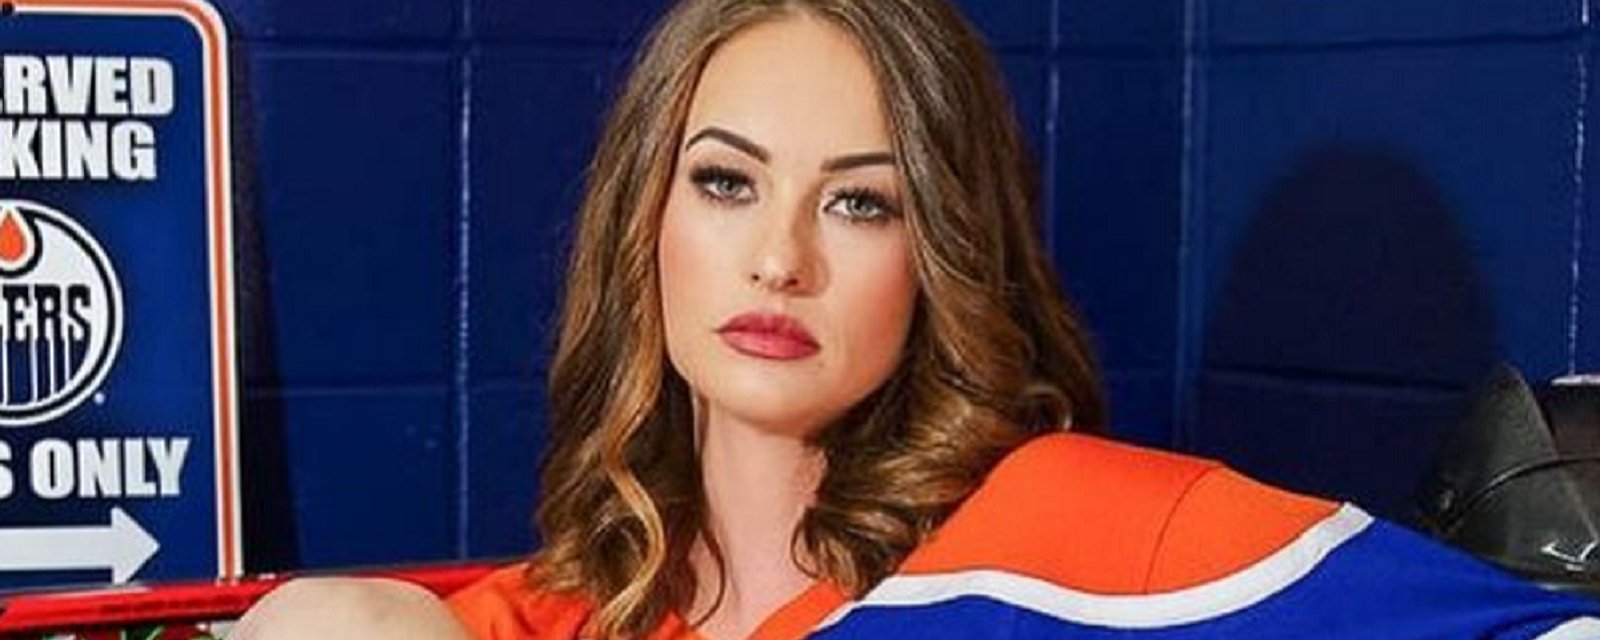 Oilers' flashing fan Kait sends one more message before Game 7.